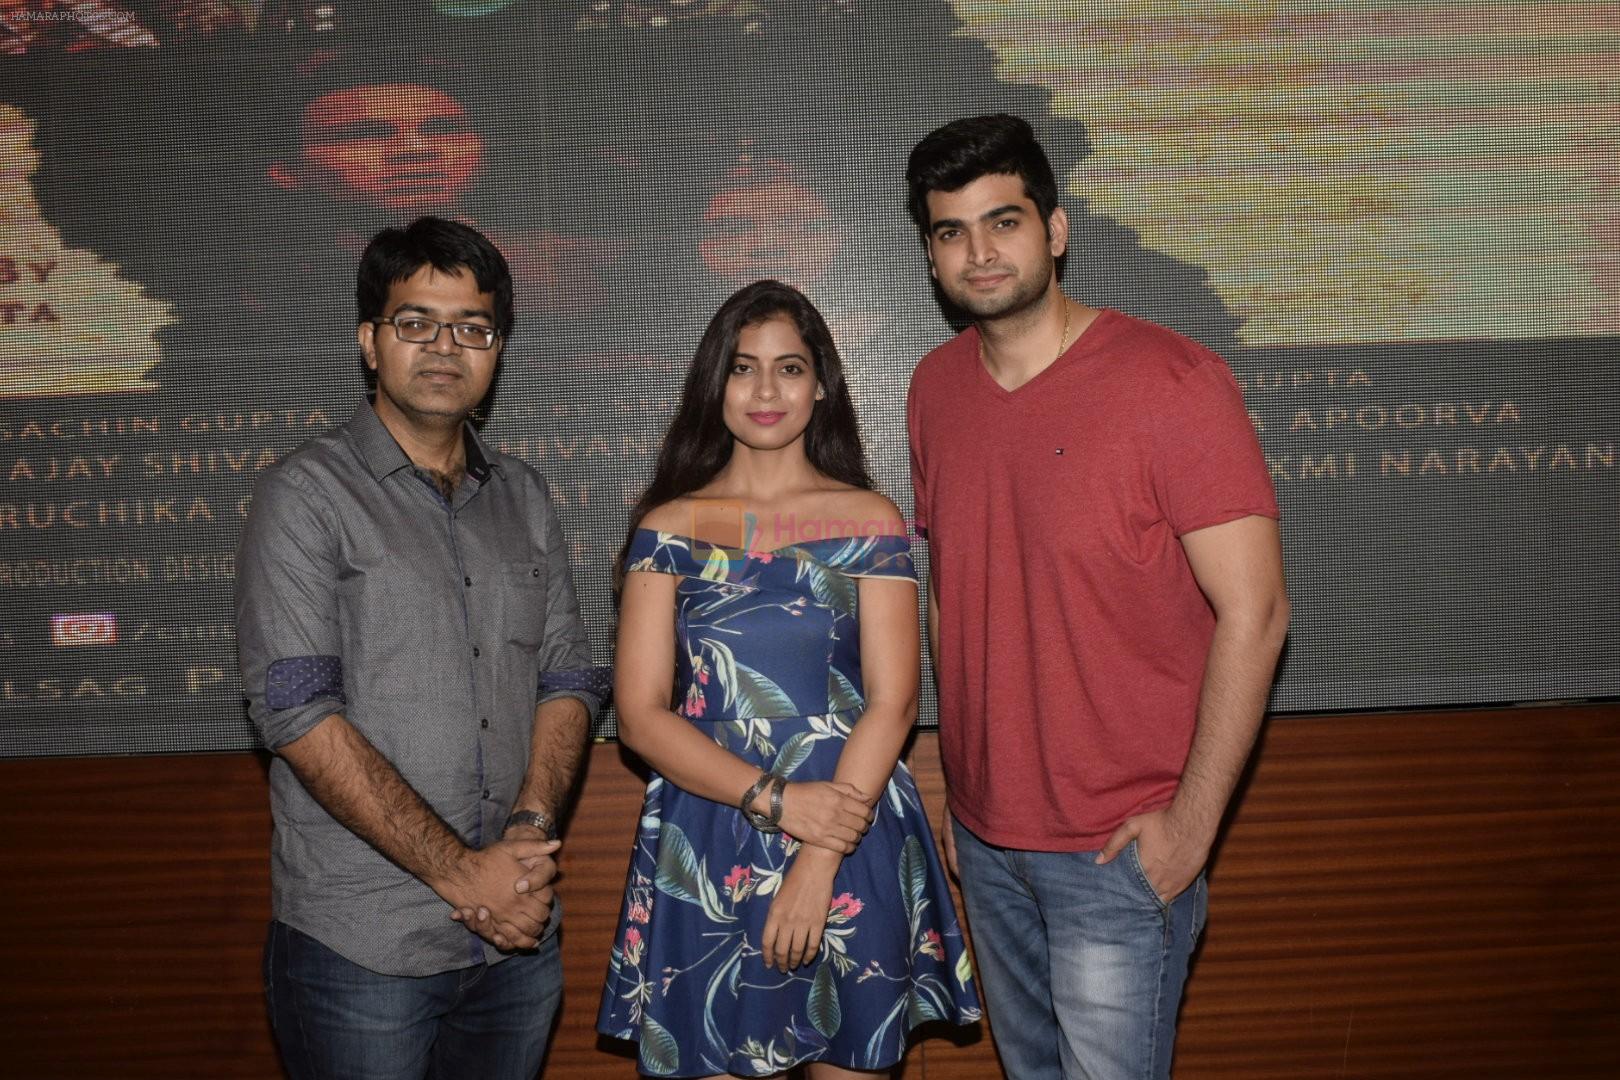 Anamika Shukla, Sumeet Kant Kaul, Sachin Gupta at the Trailer launch of film Paakhi at The View in Andheri on23rd July 2018